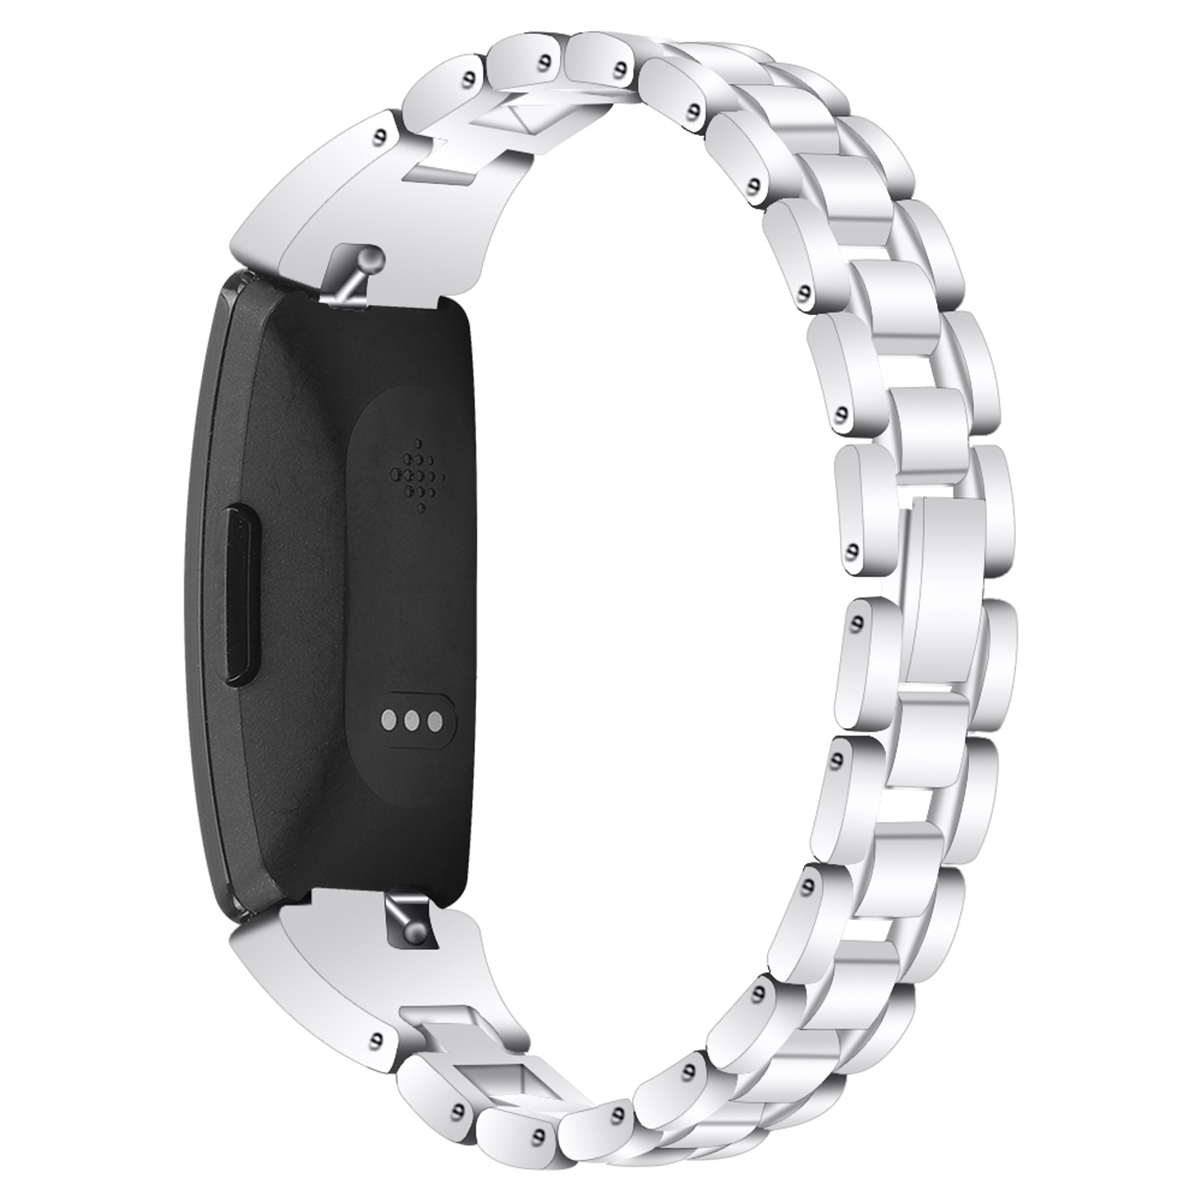 Bakeey-Watch-band-Stainless-Steel-Watch-Strap-For-Fitbit-InspireHR-1607091-10